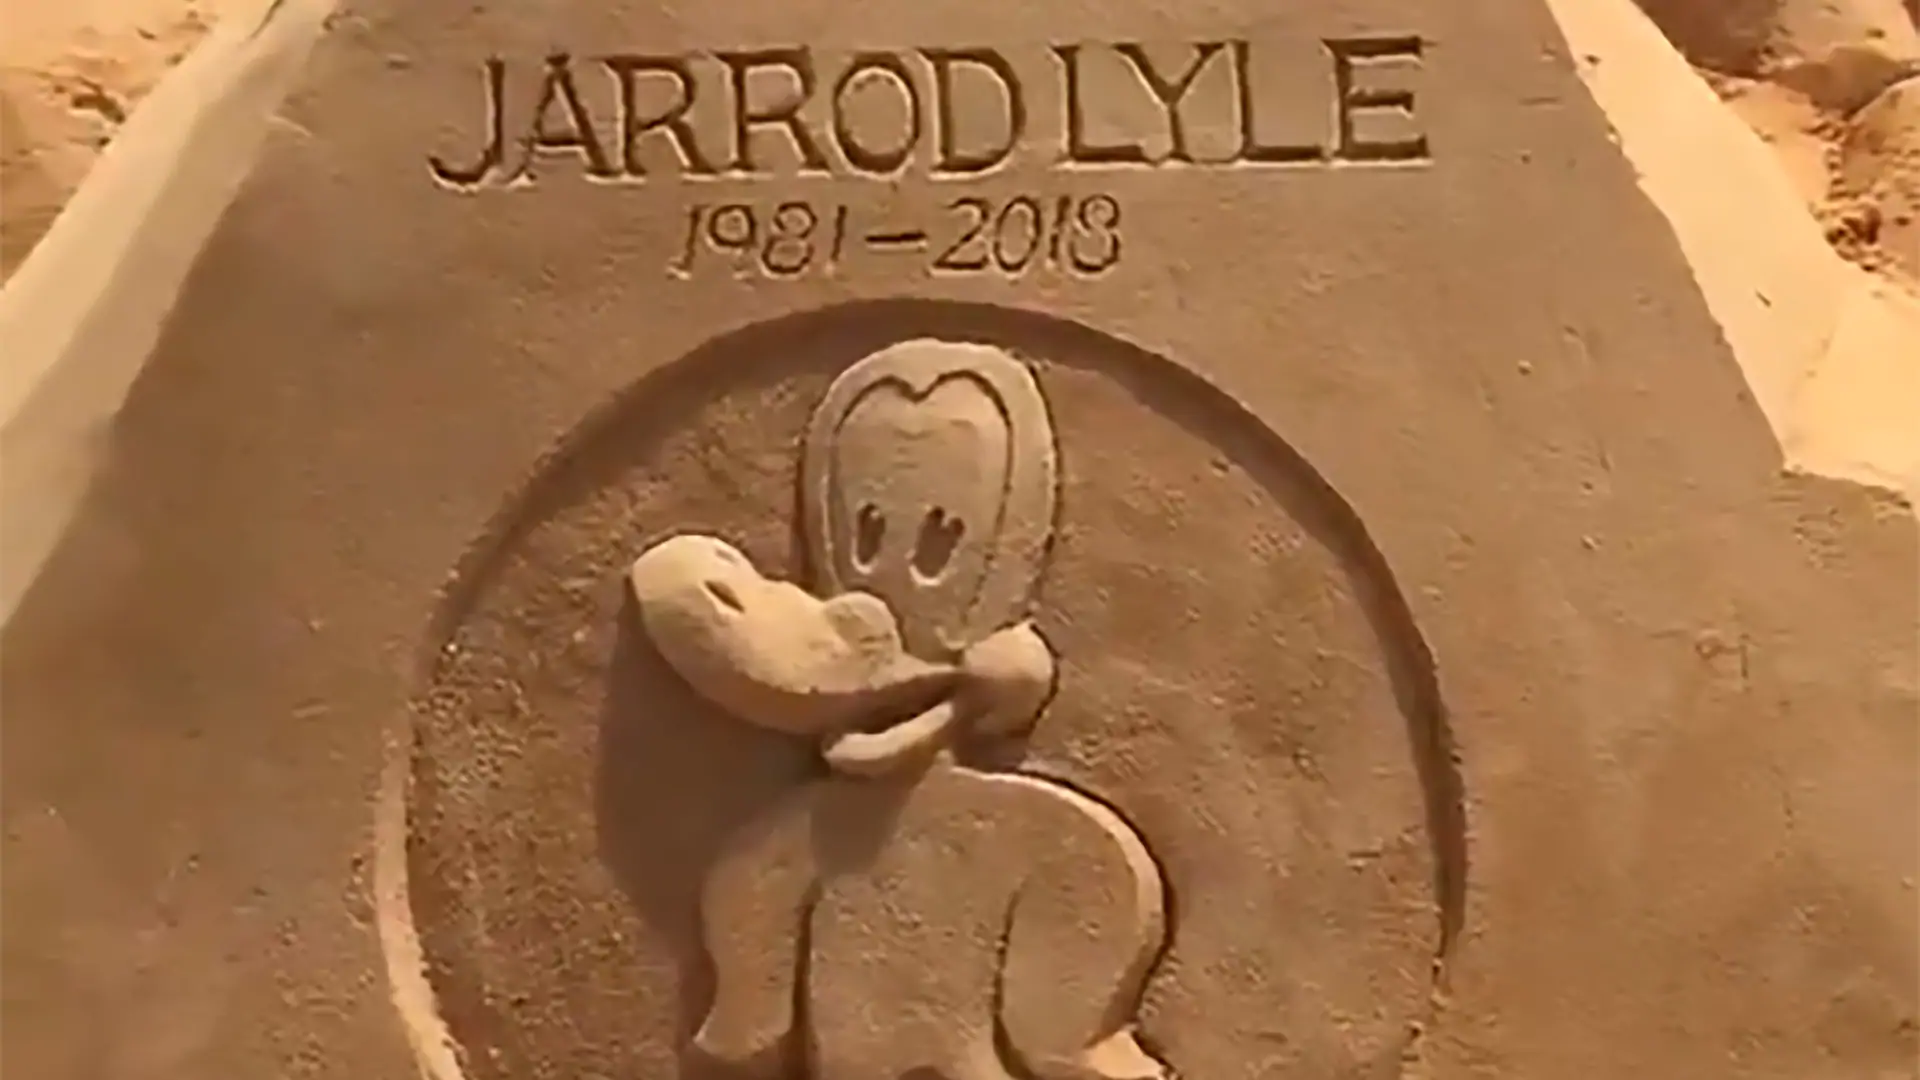 Lyle honored with sand sculpture at Wyndham